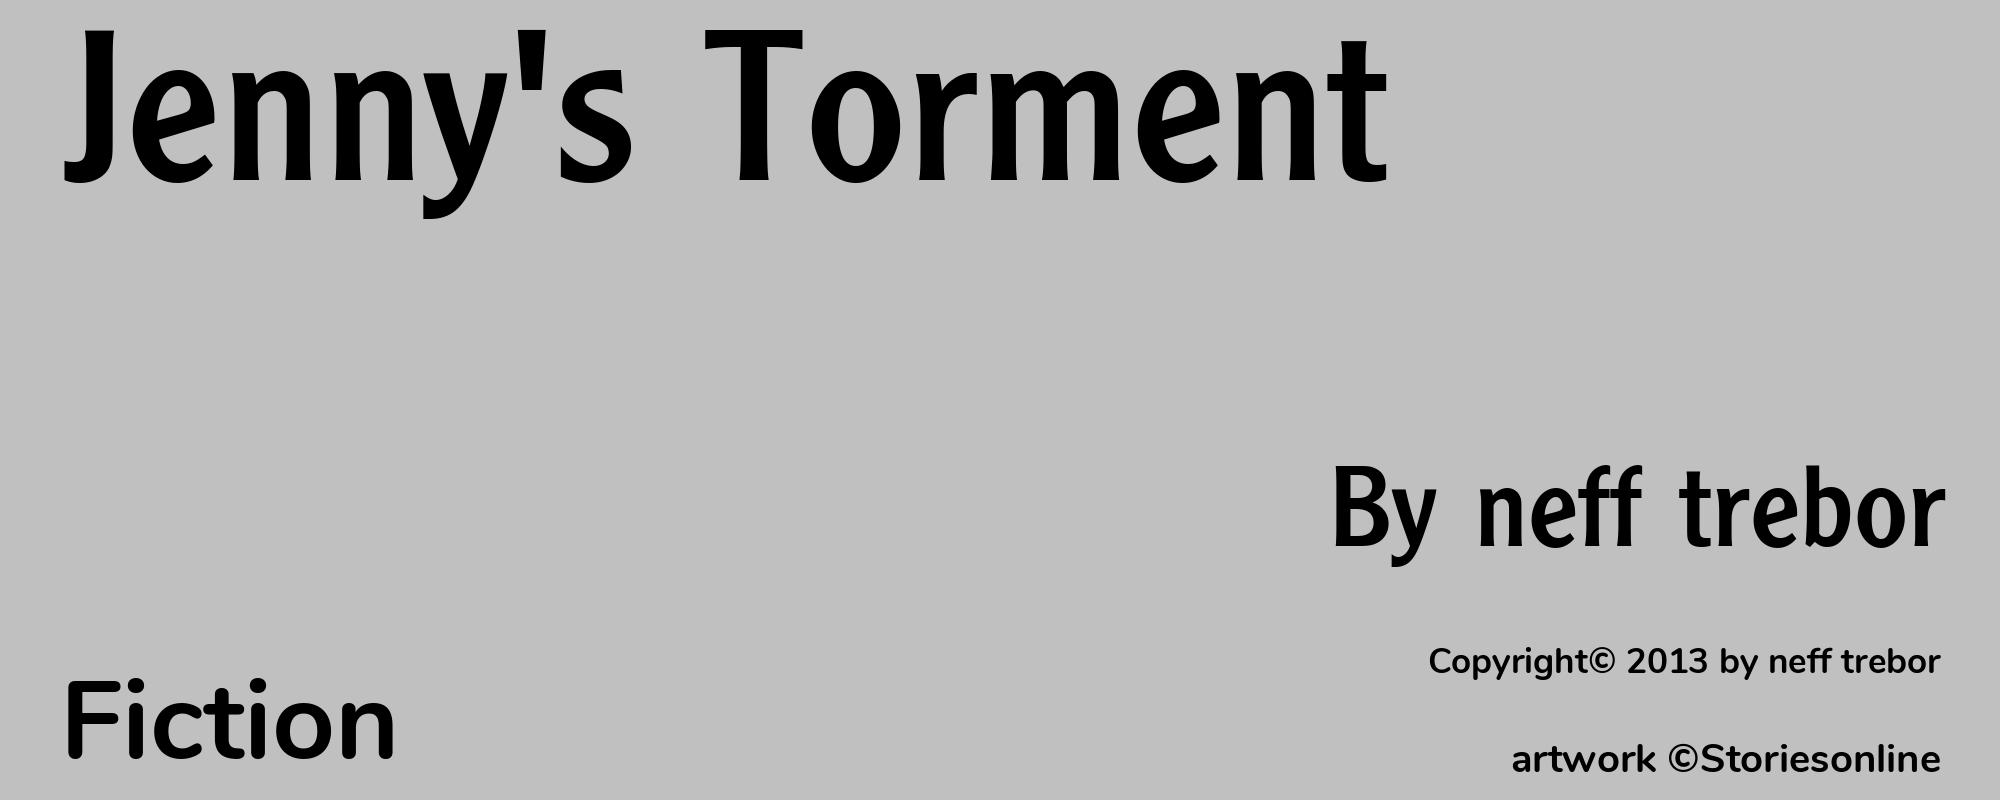 Jenny's Torment - Cover